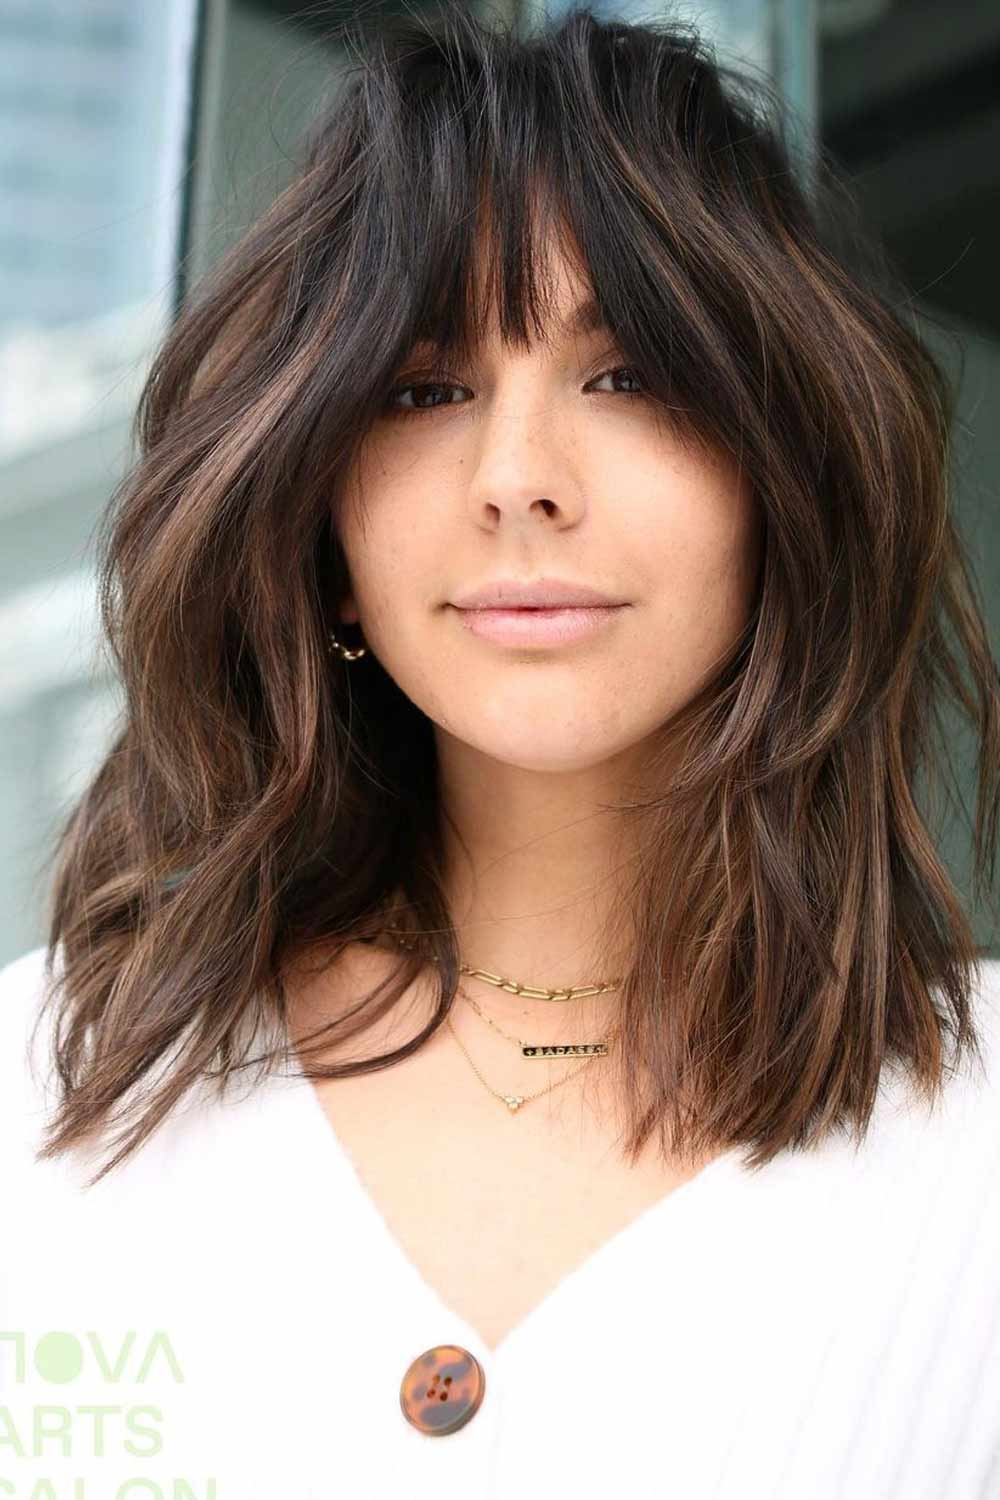 55 Medium Length Hairstyles & Haircuts for Women in 2023